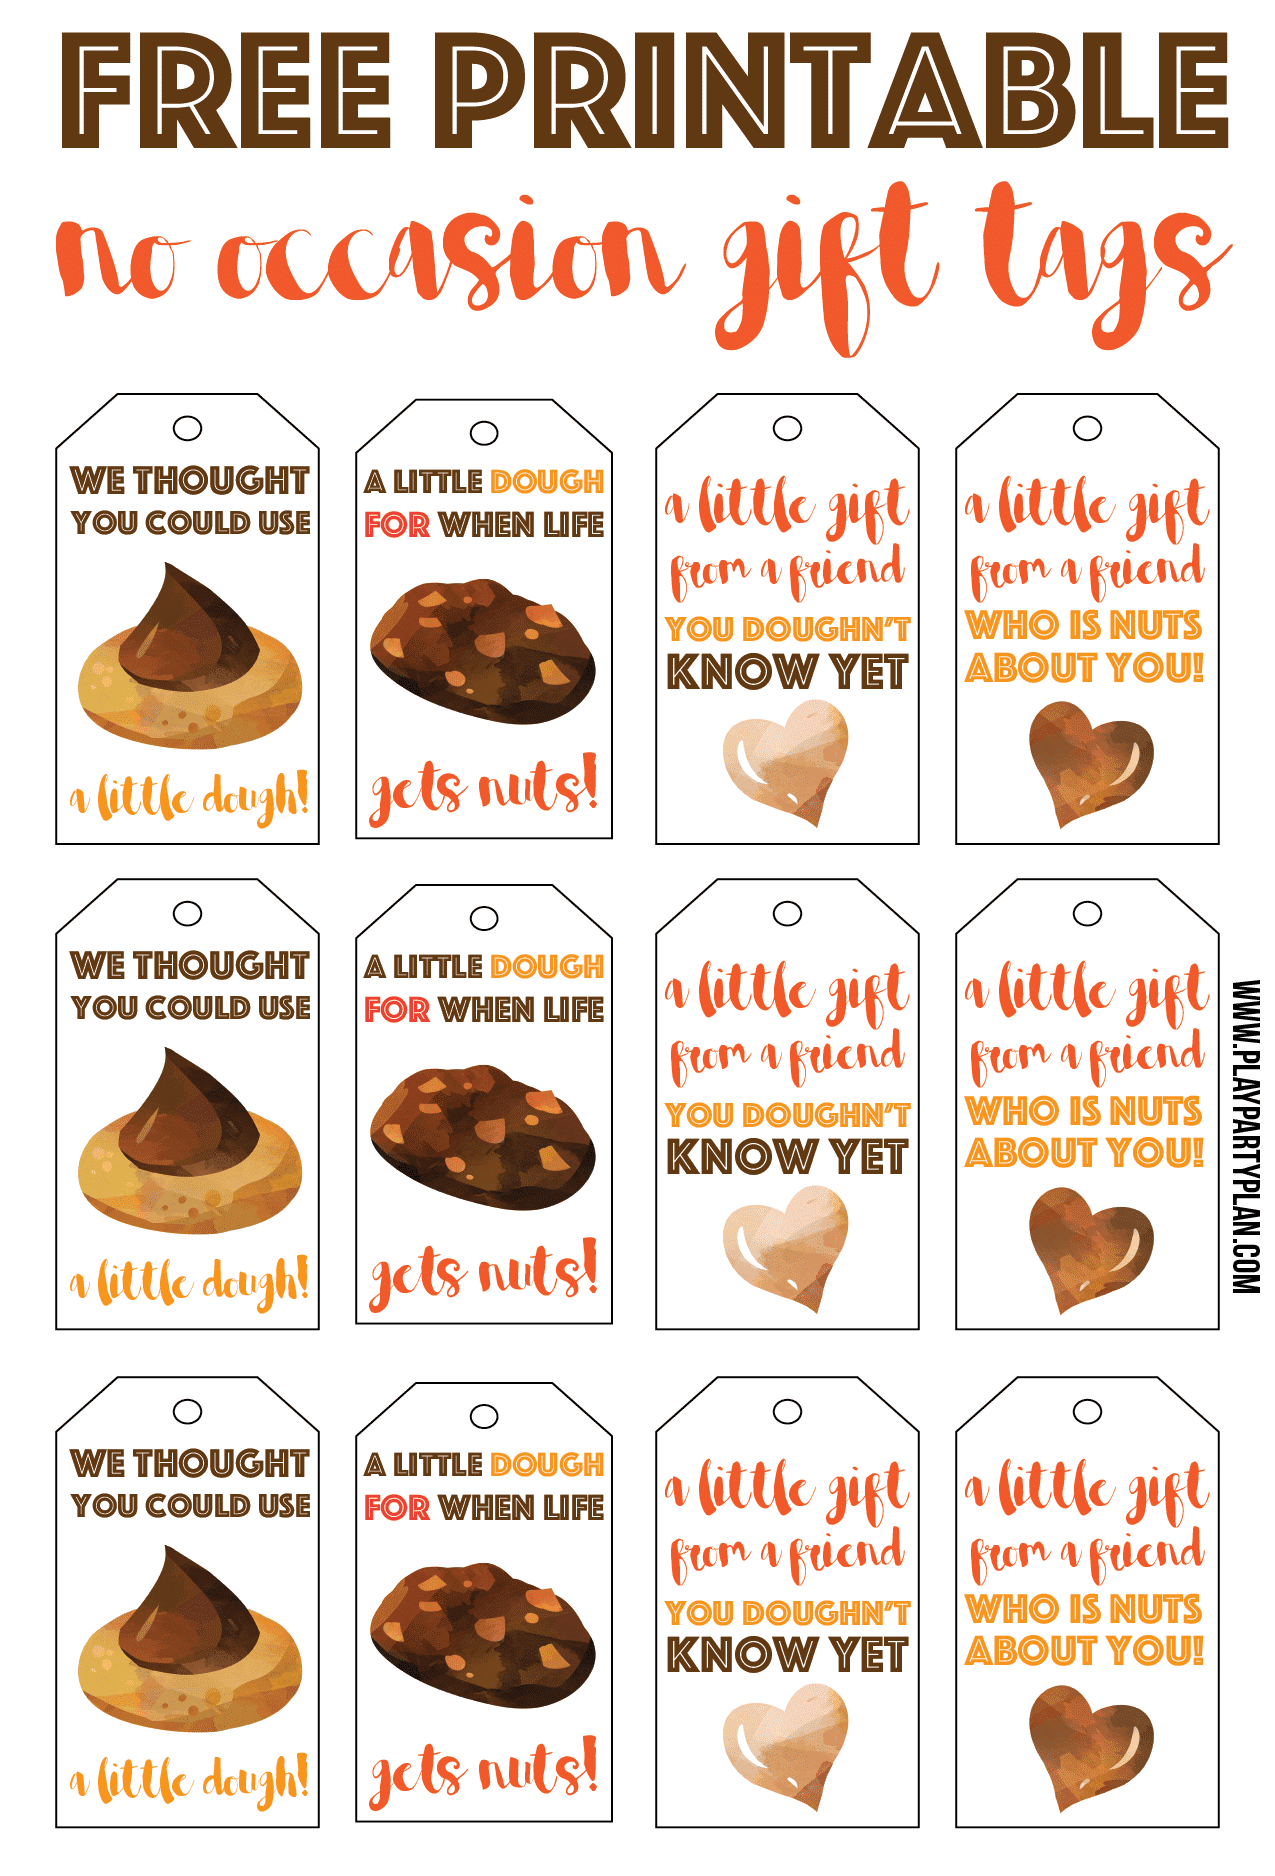 Free printable gift tags inspired by cookies and cookie dough